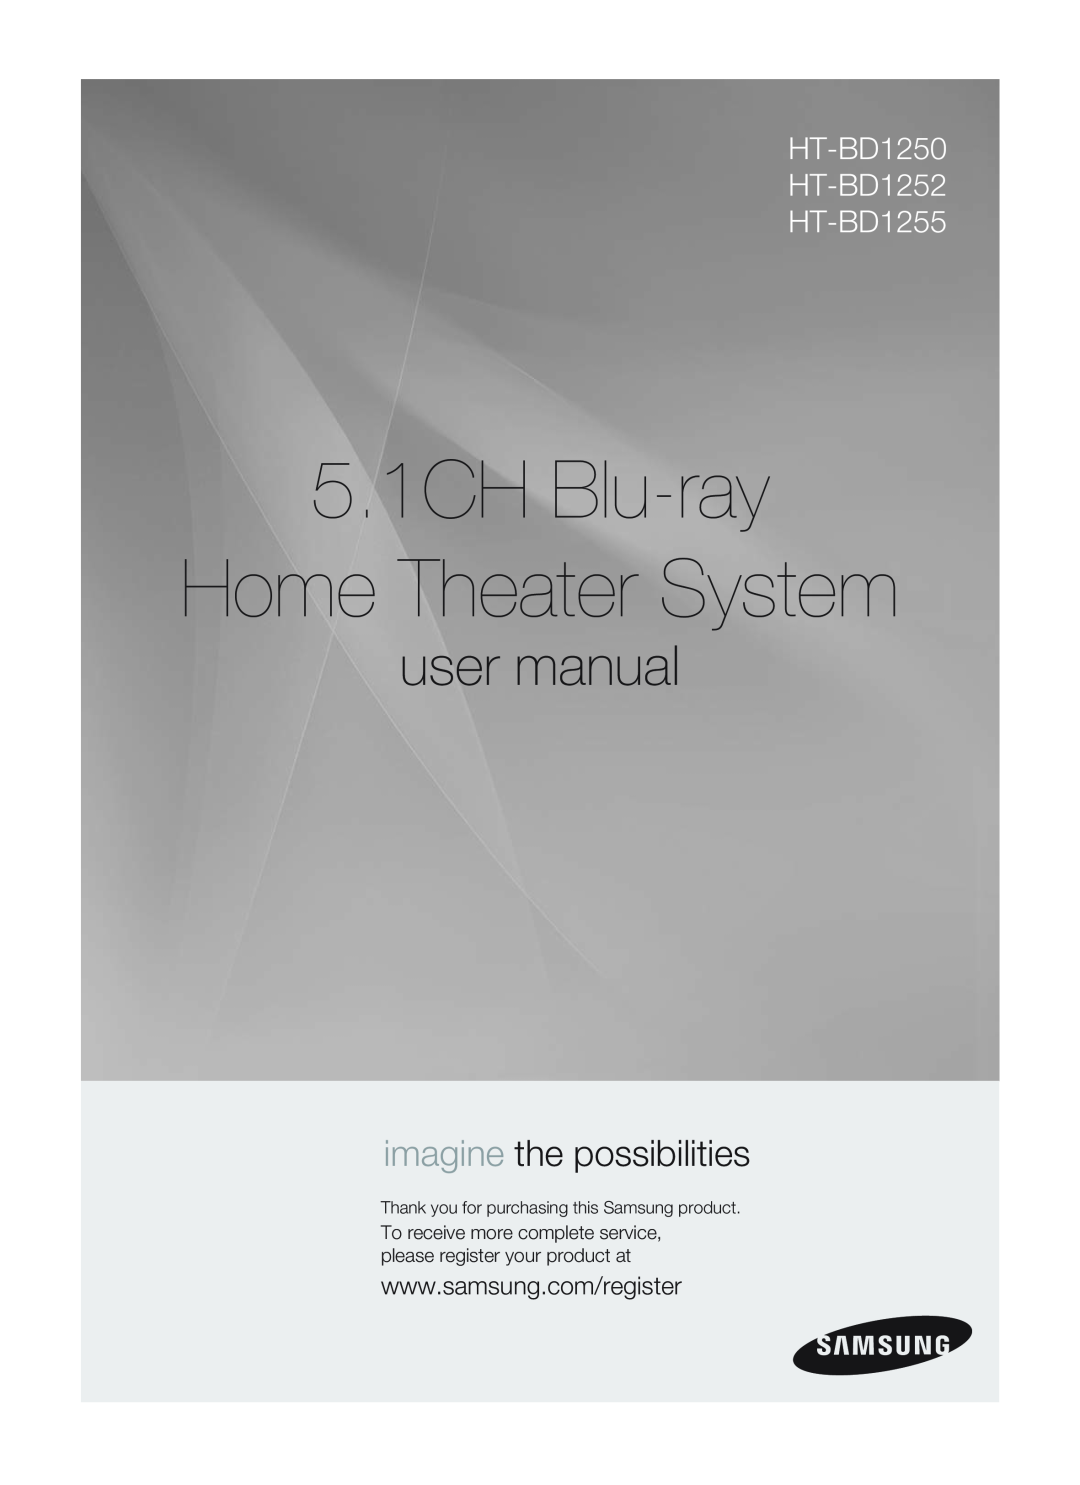 Samsung user manual 5.1CH Blu-ray Home Theater System, imagine the possibilities, HT-BD1250 HT-BD1252 HT-BD1255 